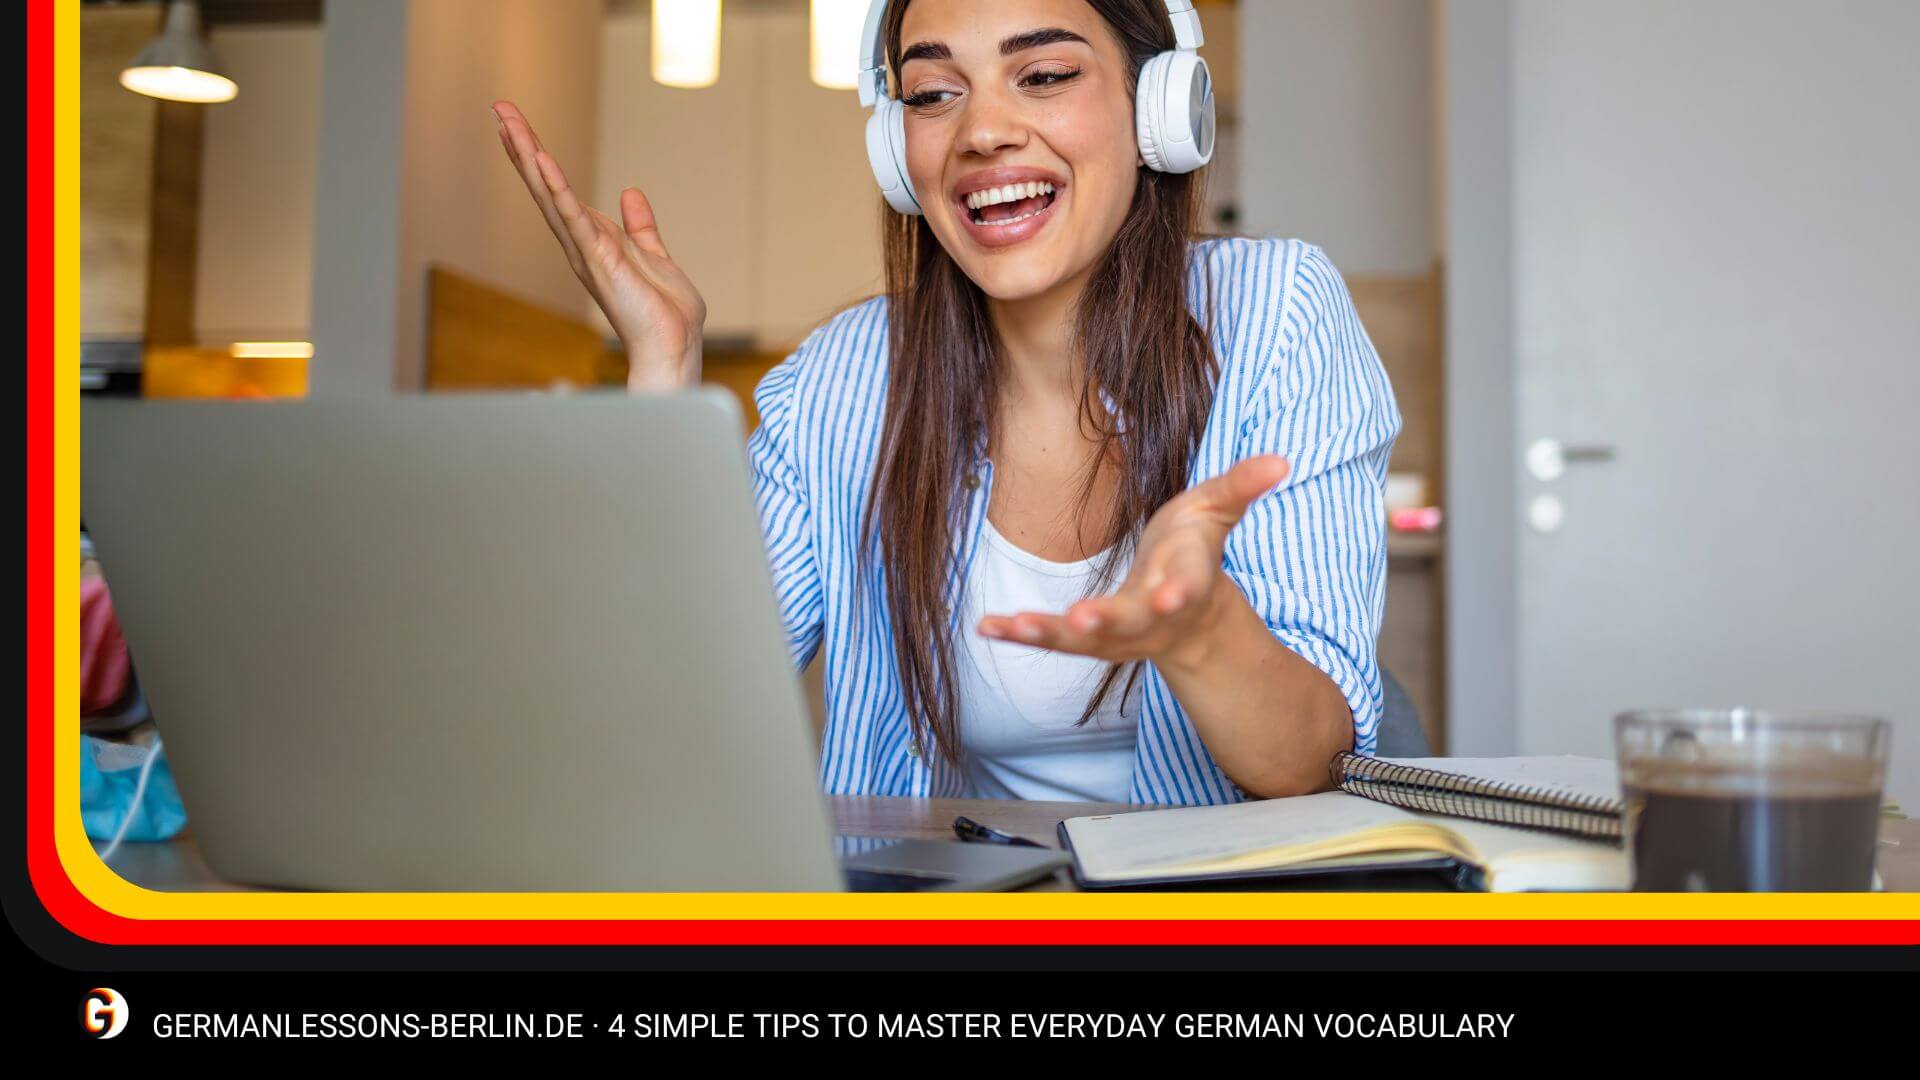 4 Simple Tips to Master Everyday German Vocabulary